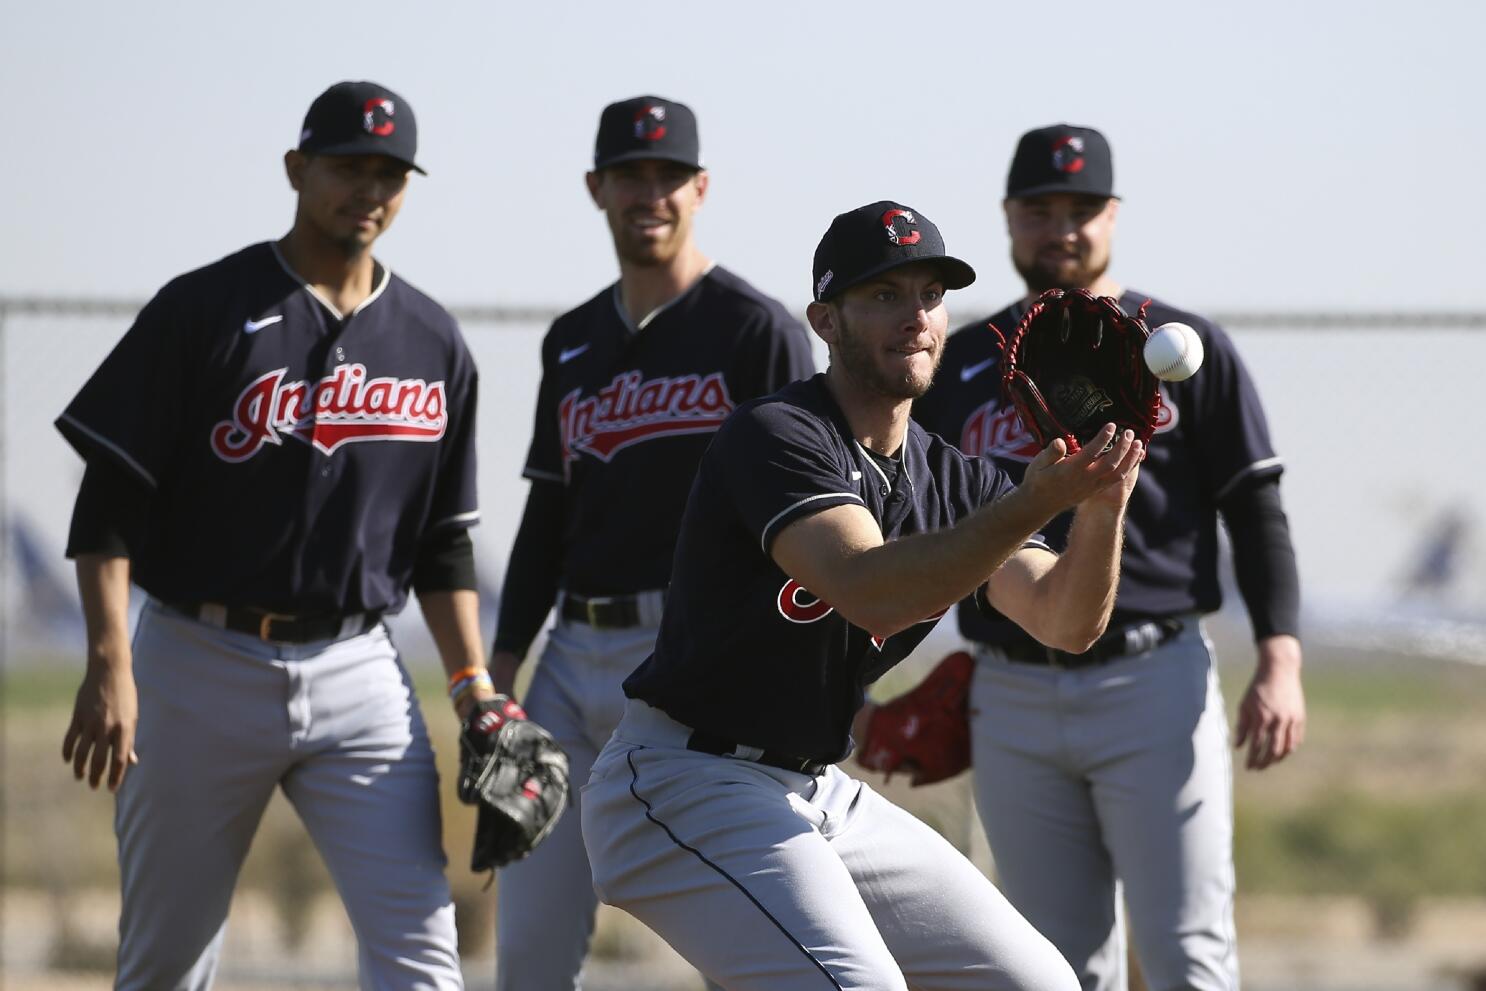 No changes coming to Cleveland Indians' uniforms in 2020 despite